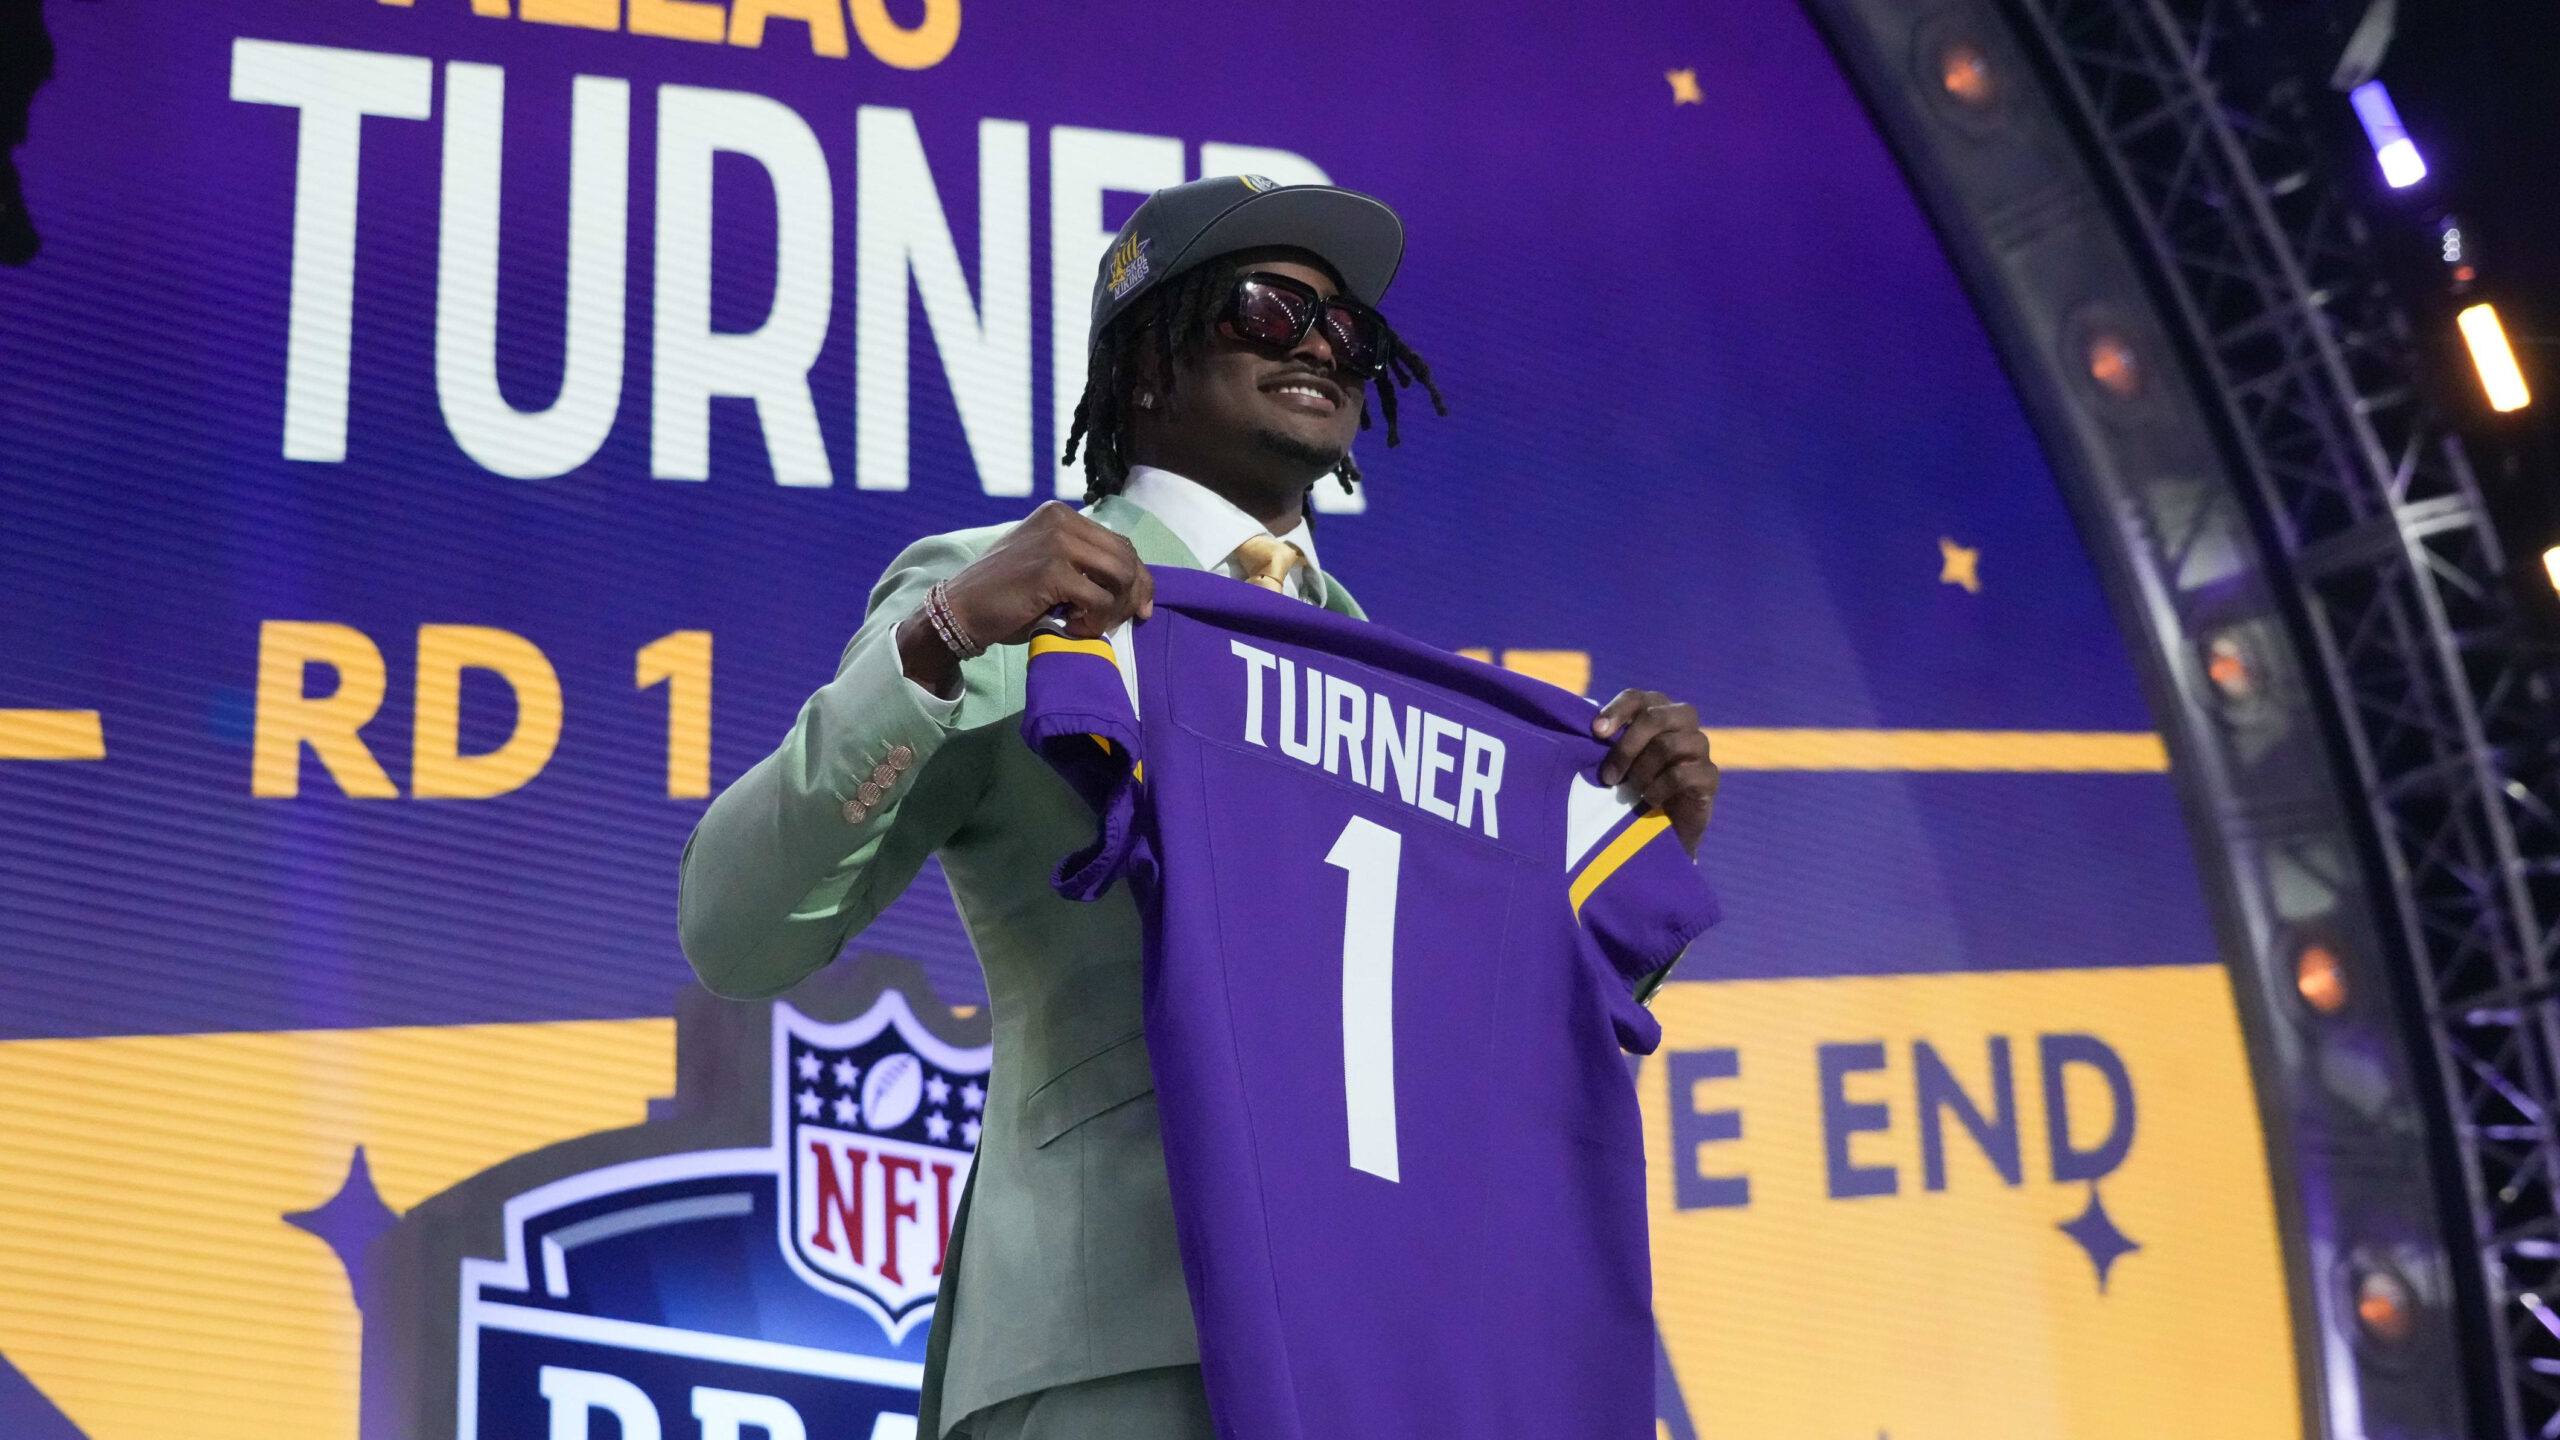 No One Happier the Vikings Got Dallas Turner Than Coach Kevin O’Connell